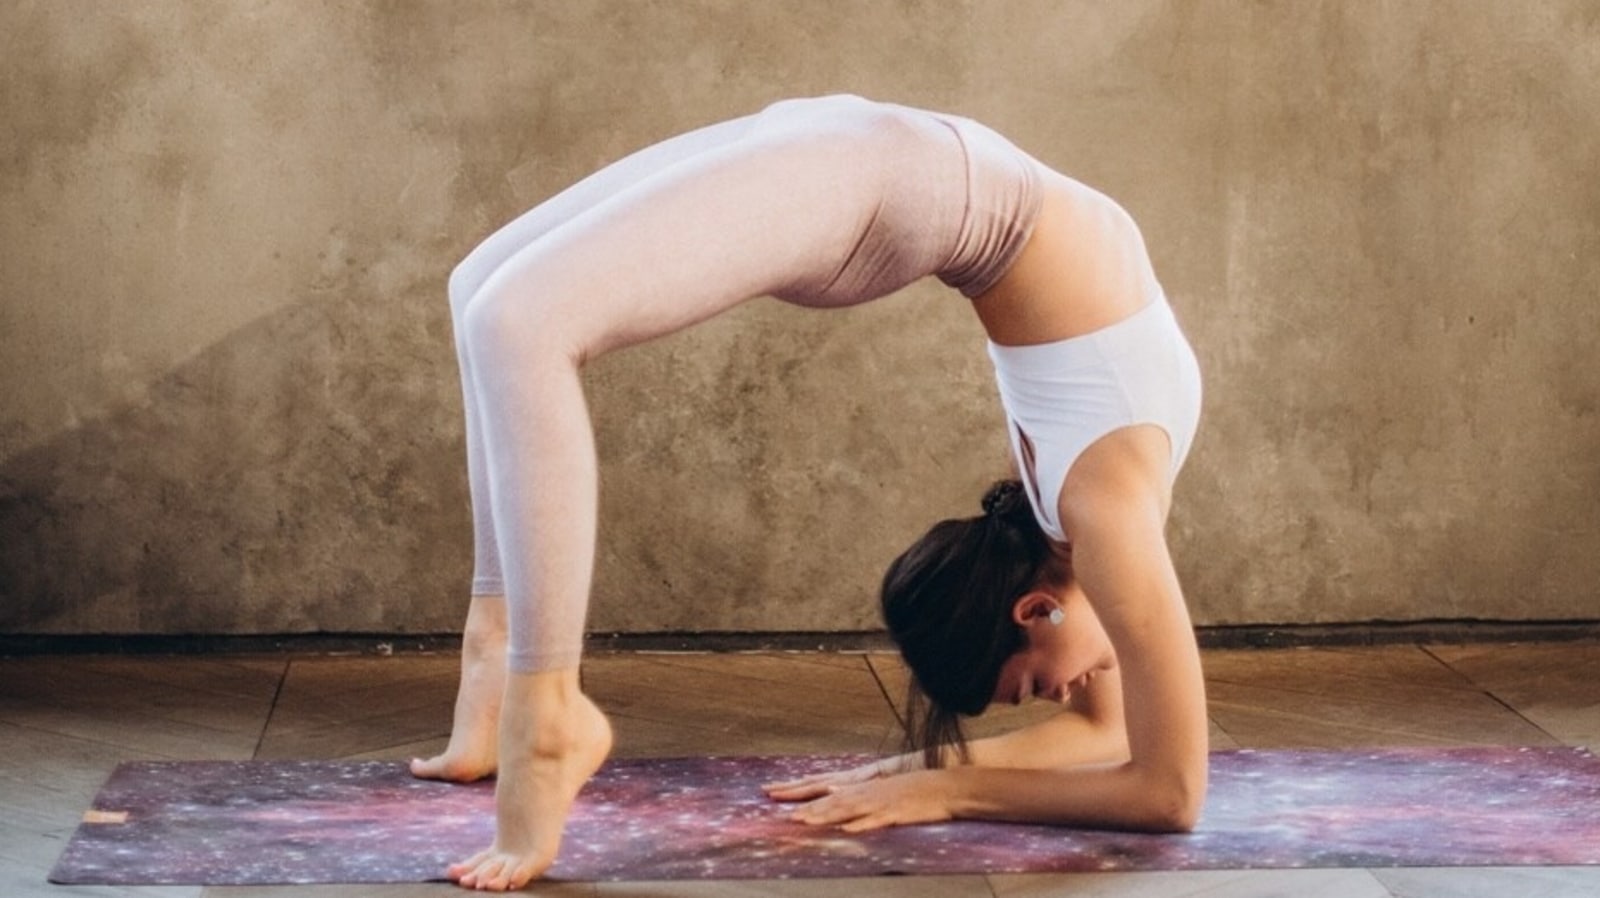 Yoga Poses for Asthma to Ease Strained Breathing - Yoga Journal